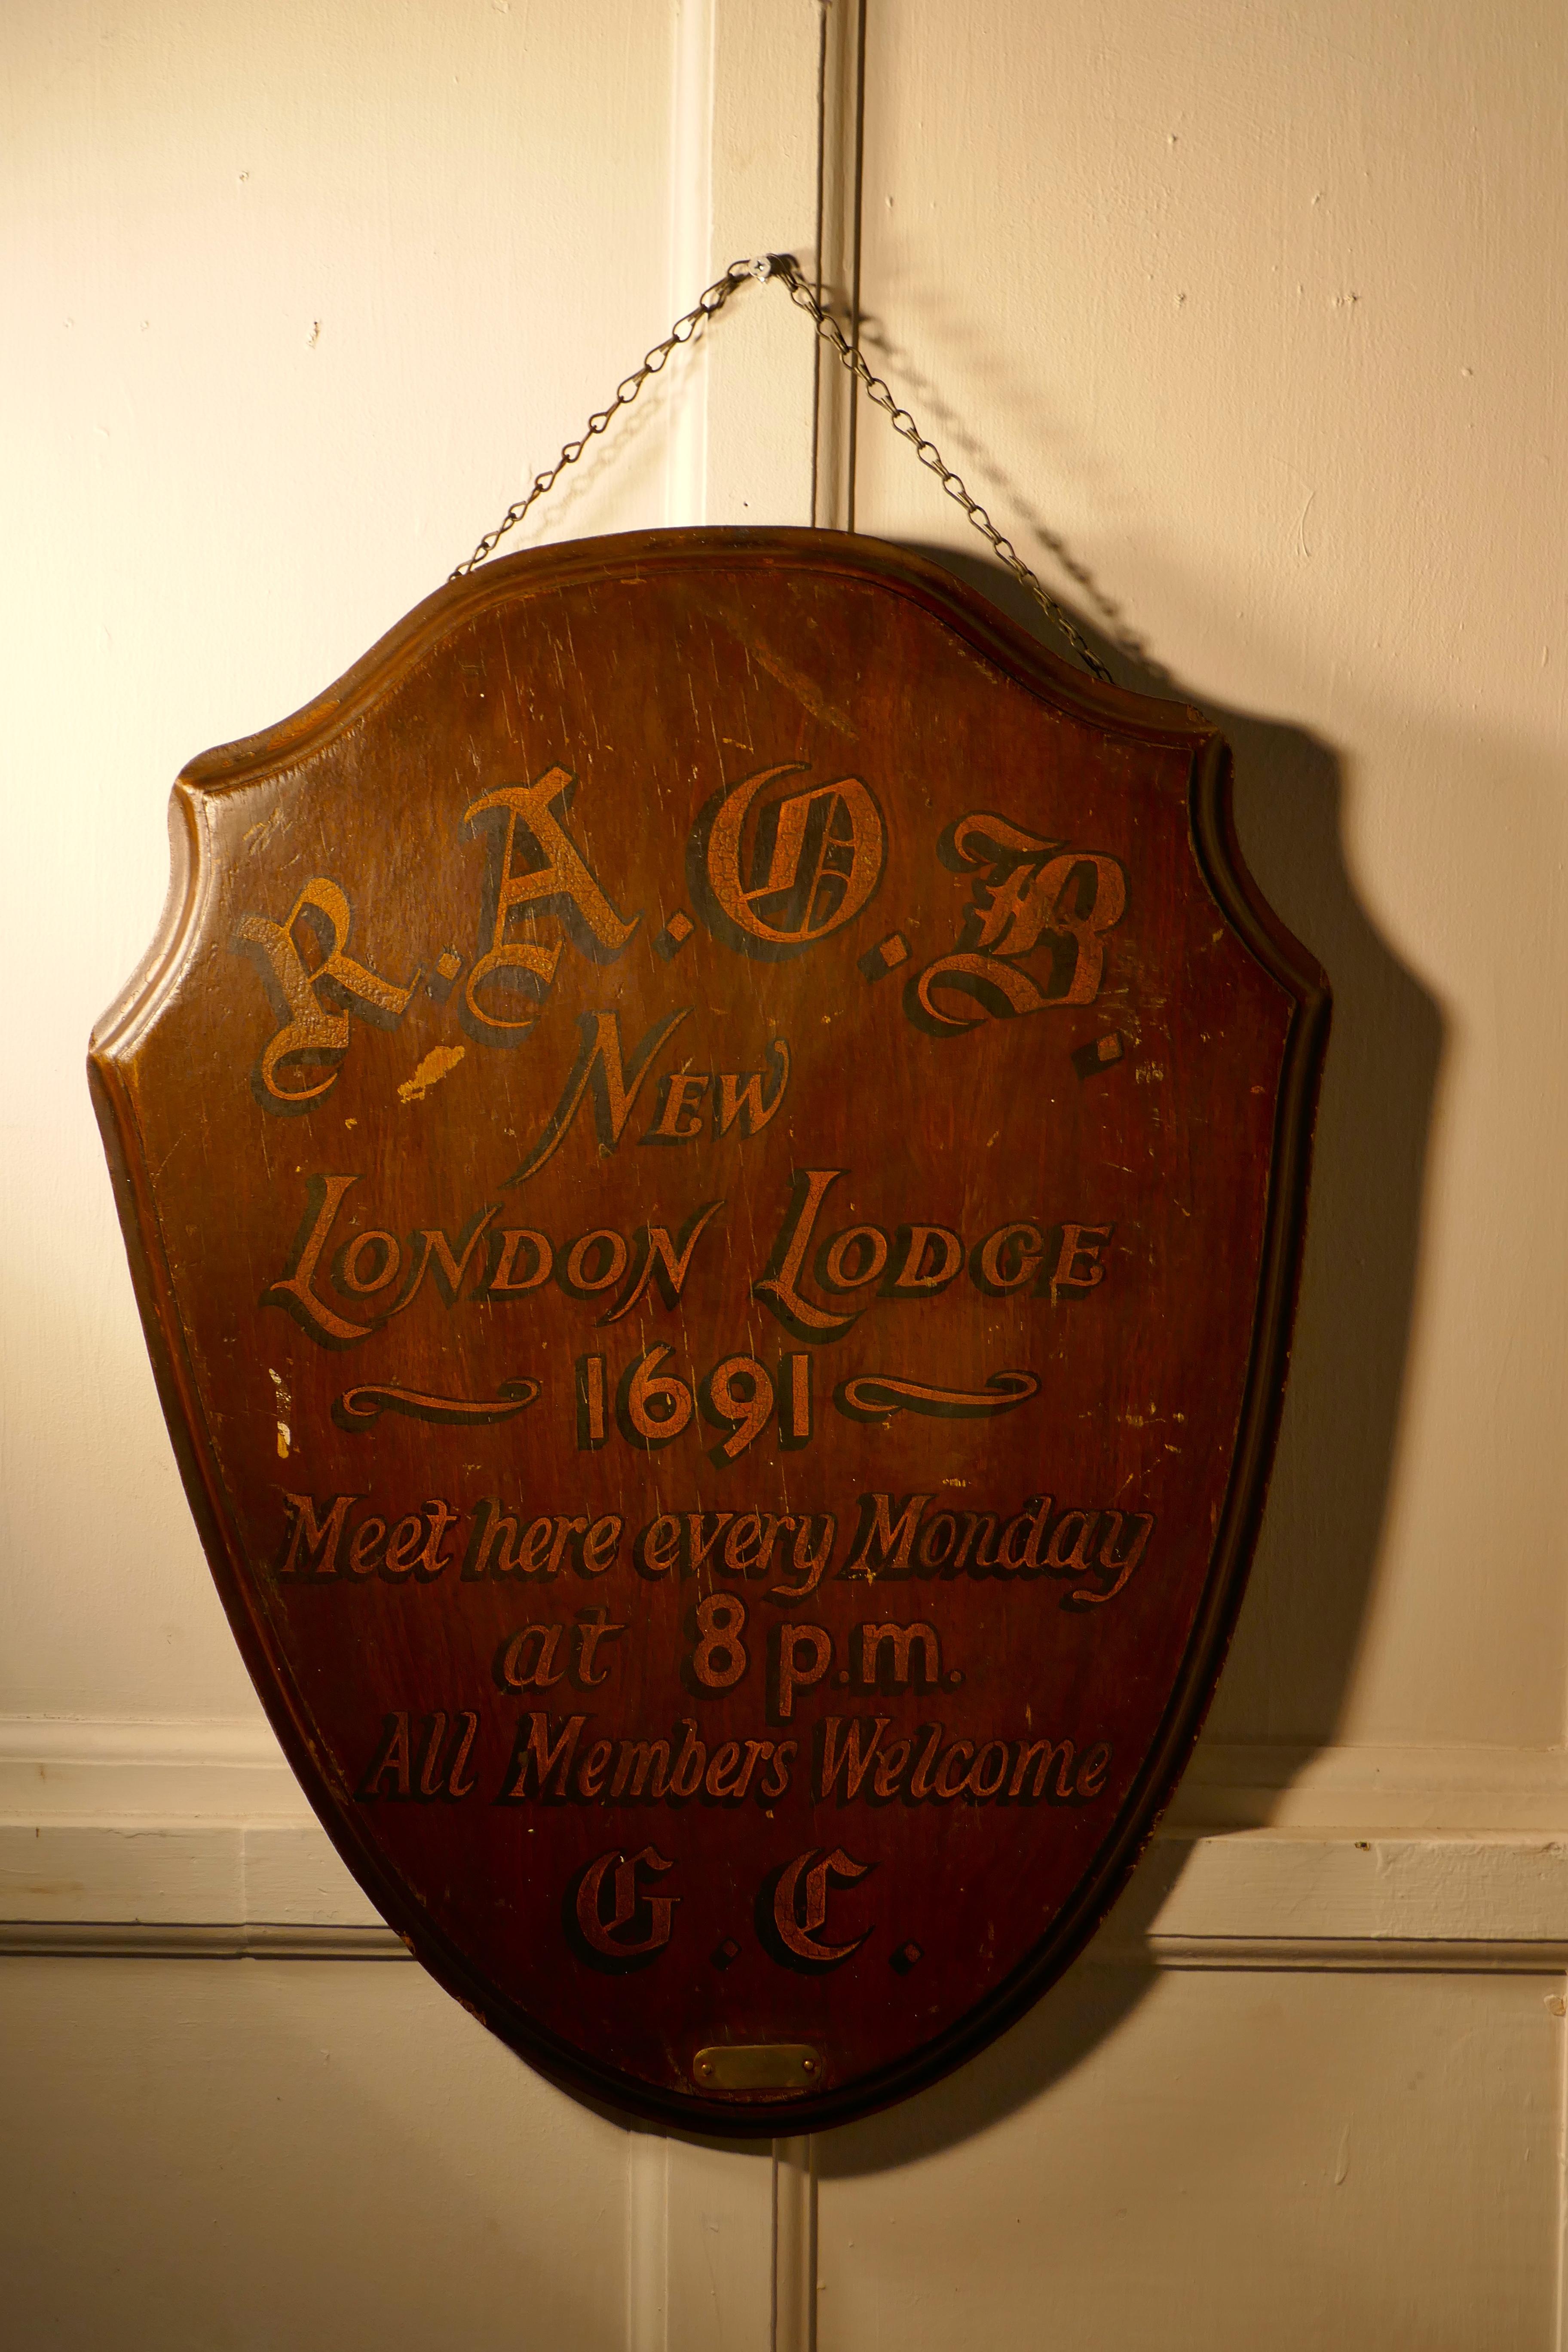 R.A.O.B buffaloes, New London lodge 1691, oak wall plaque / shield

Royal Antediluvian order of buffaloes, this large wooden wall plaque was painted for the New London lodge no 1691

The plaque is sold oak and has gold and black shadowed writing